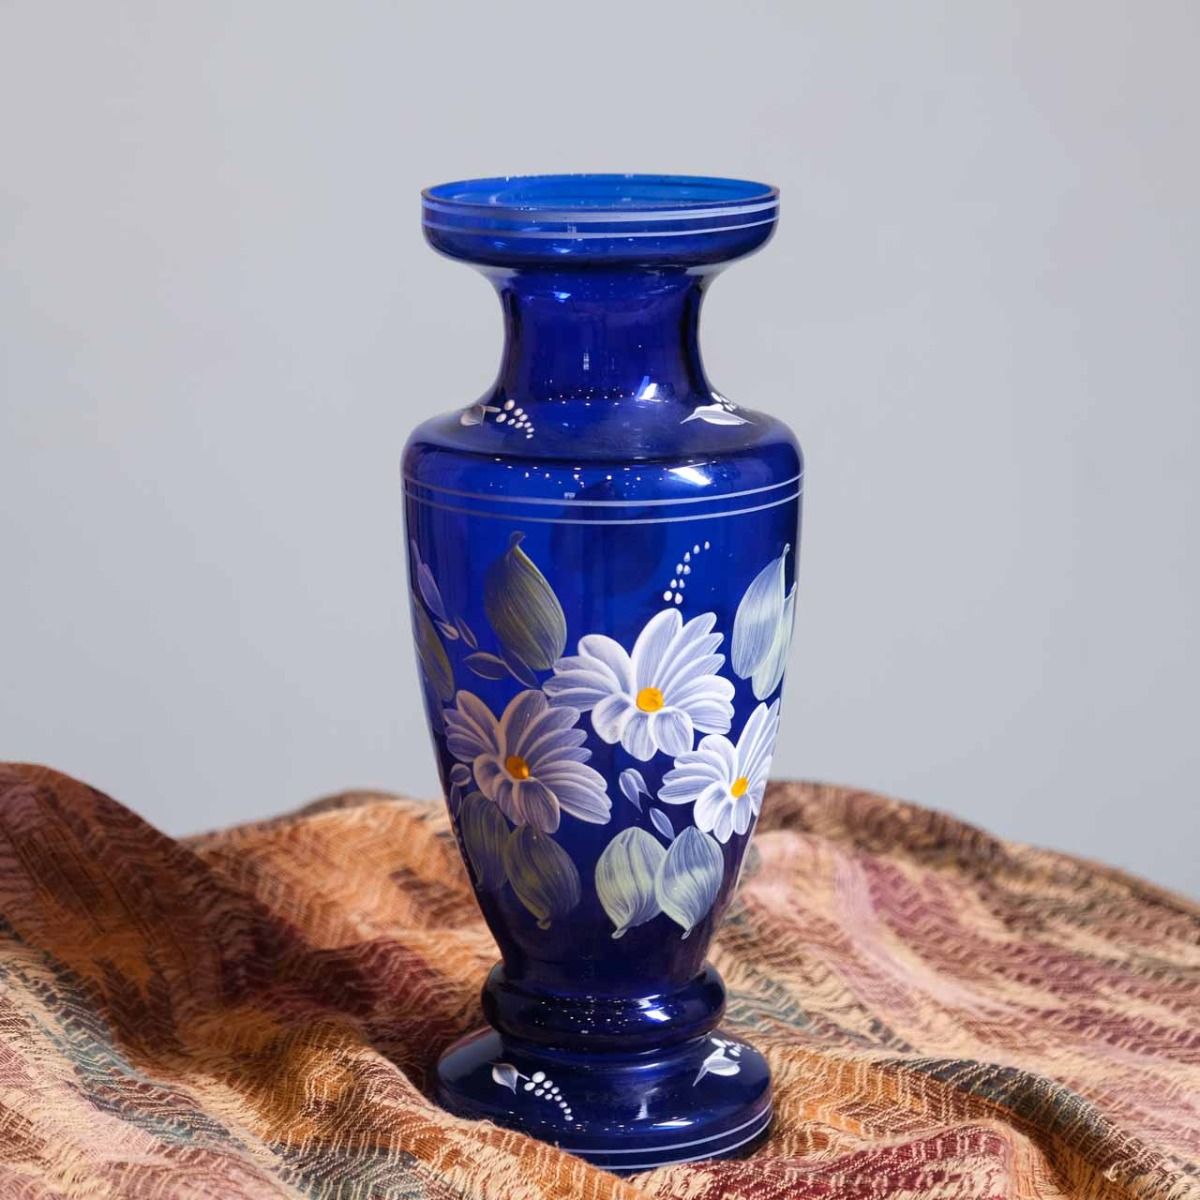 Antique Glass Vase, antique vase decorated with hand-painted floral patterns